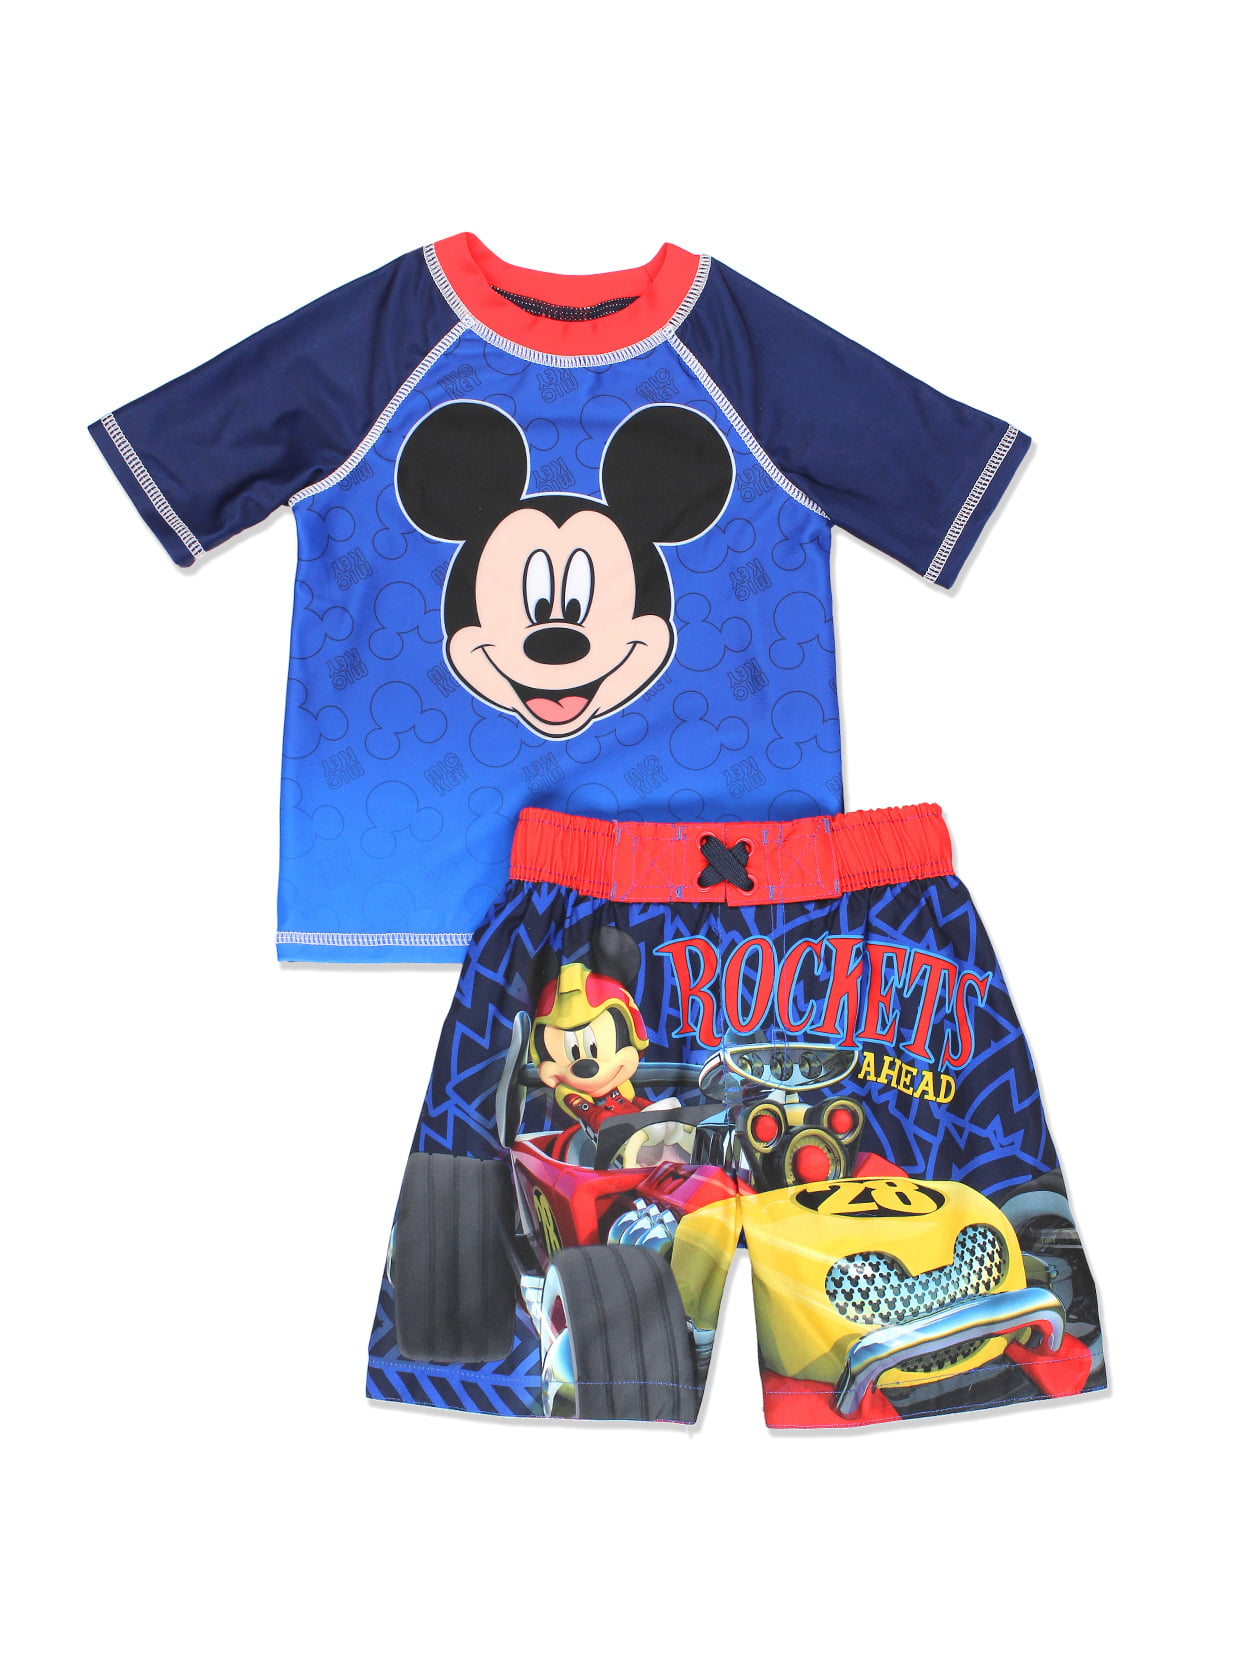 Boys Mickey Mouse Two Piece Swimming Trunks And T Shirt Set Surf Swim Wear Beach 